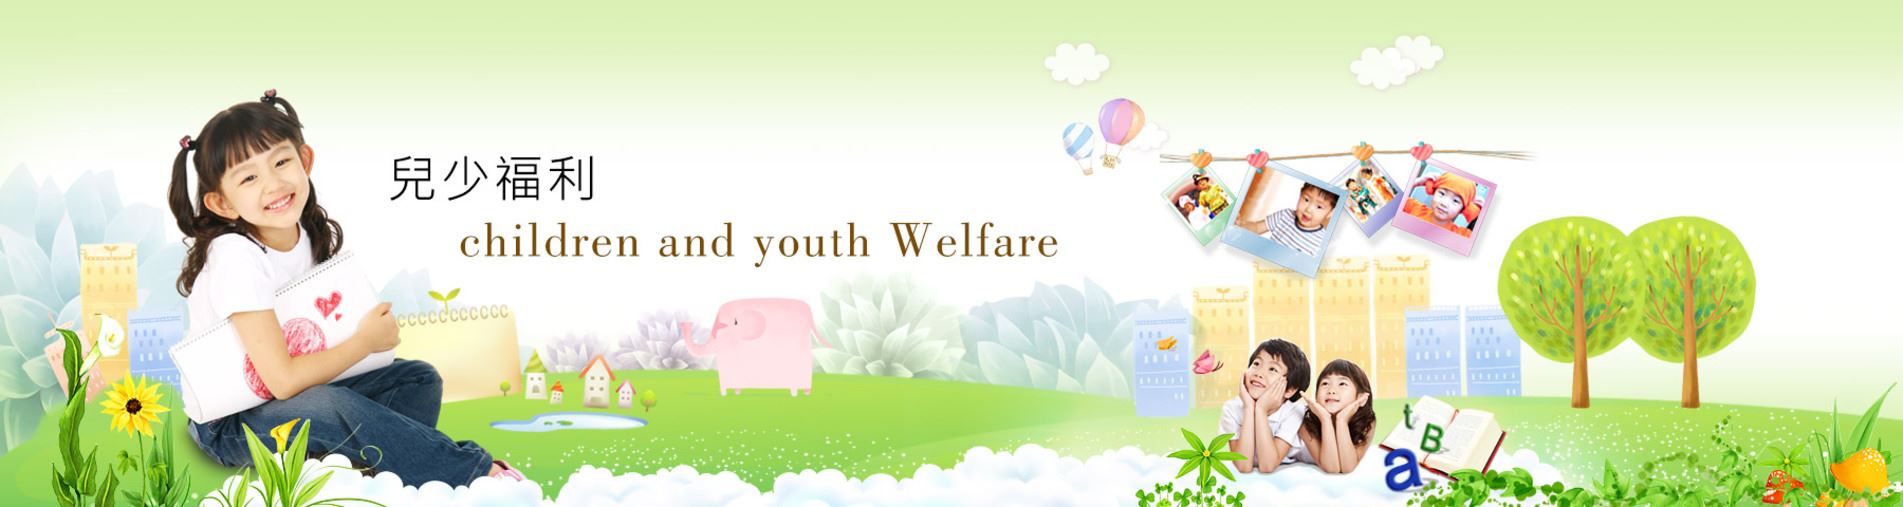 children and youth Welfare